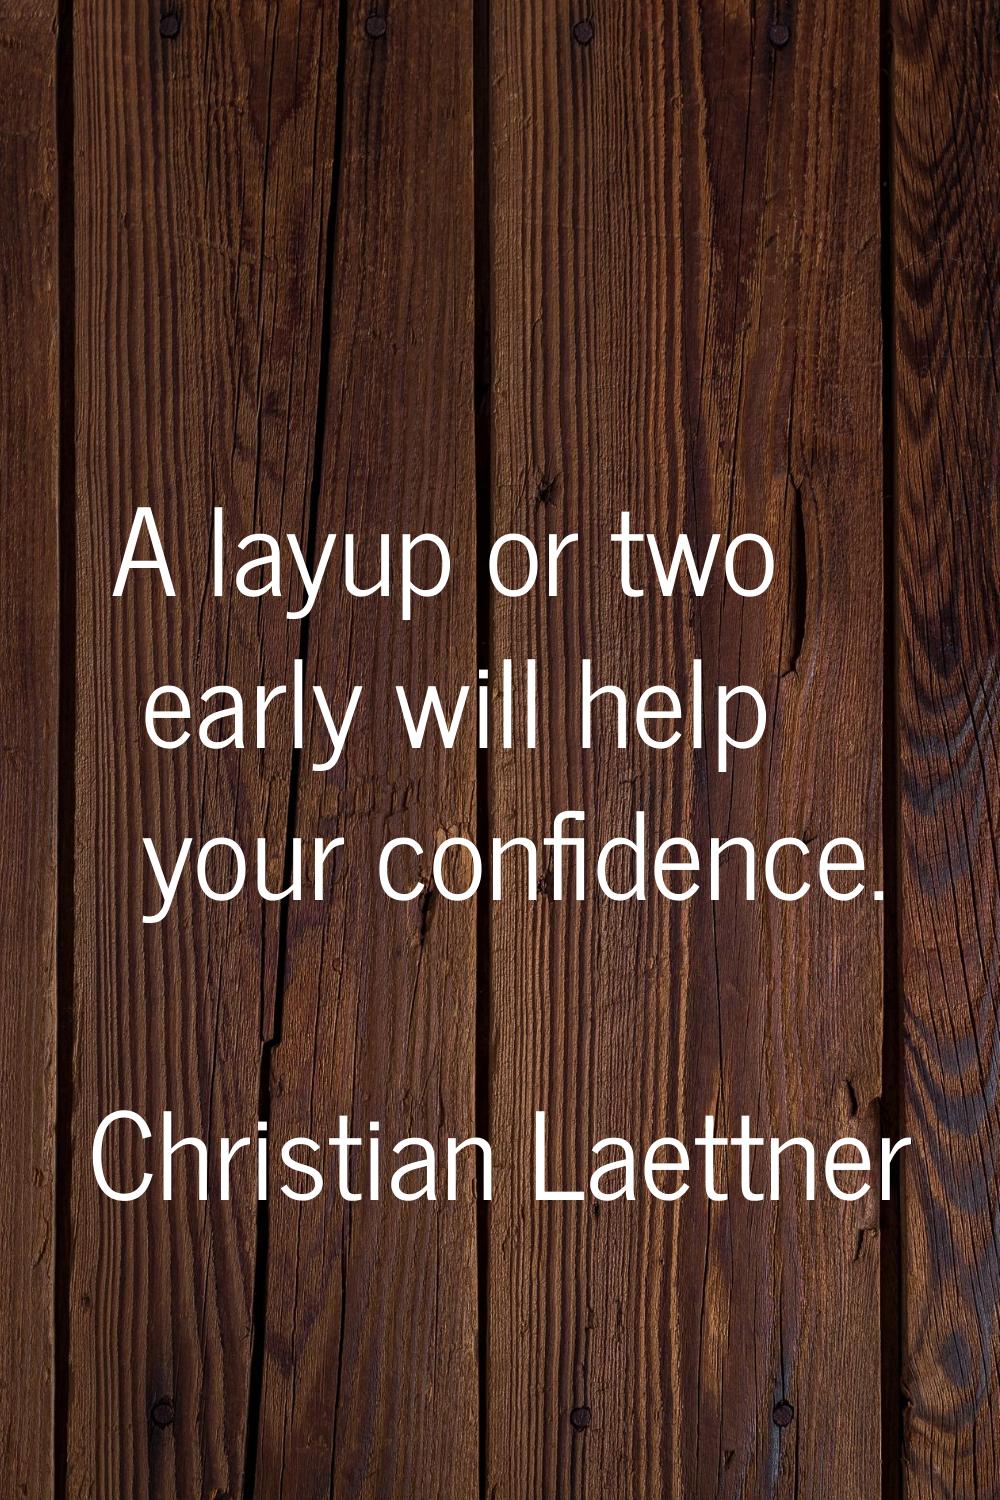 A layup or two early will help your confidence.